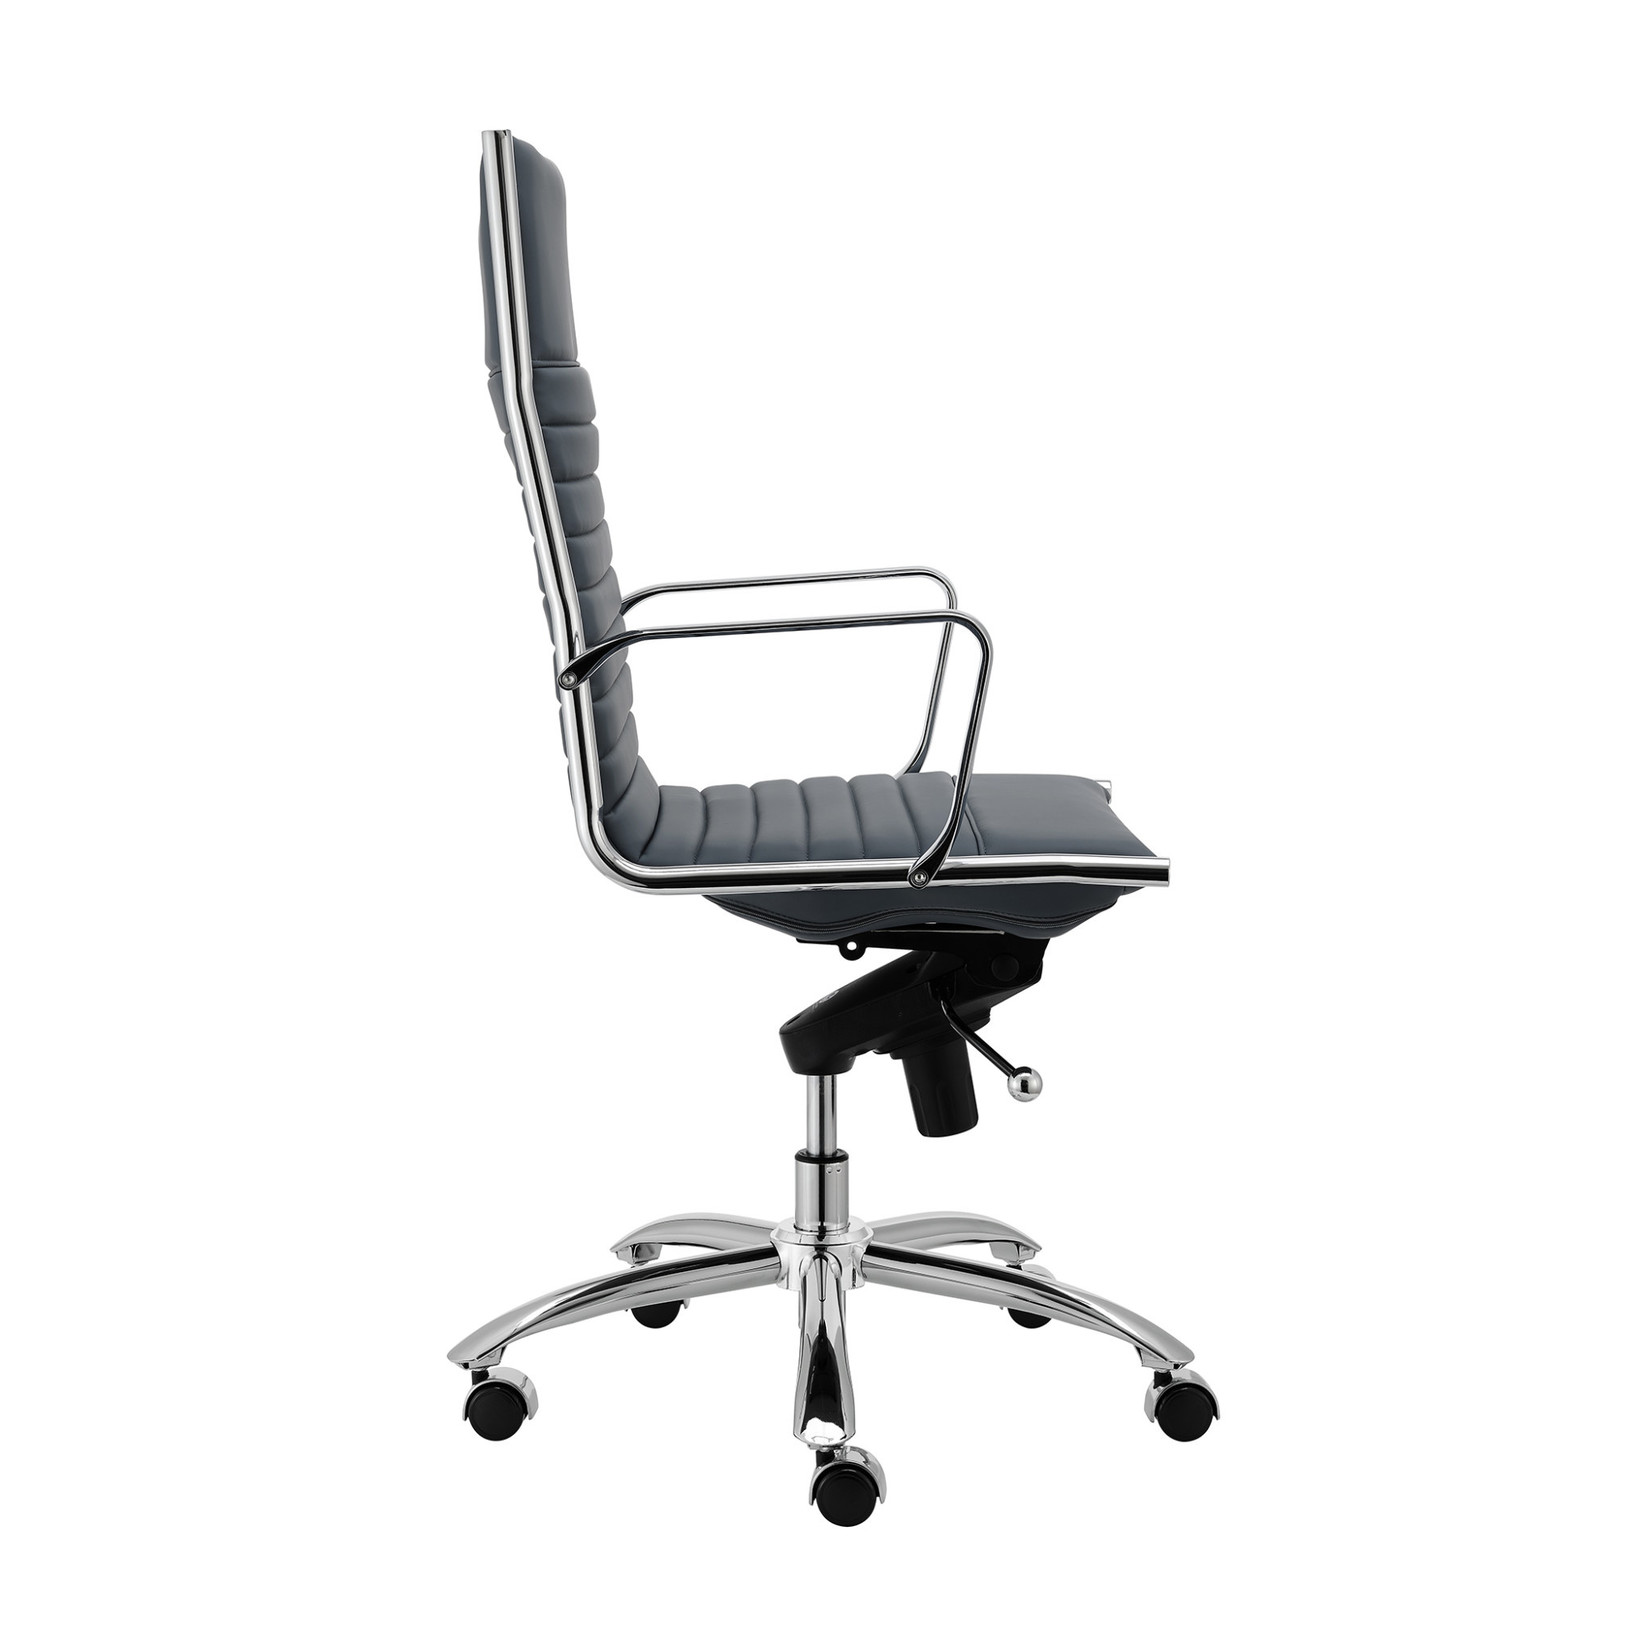 EuroStyle Dirk HB Office Chair Blue